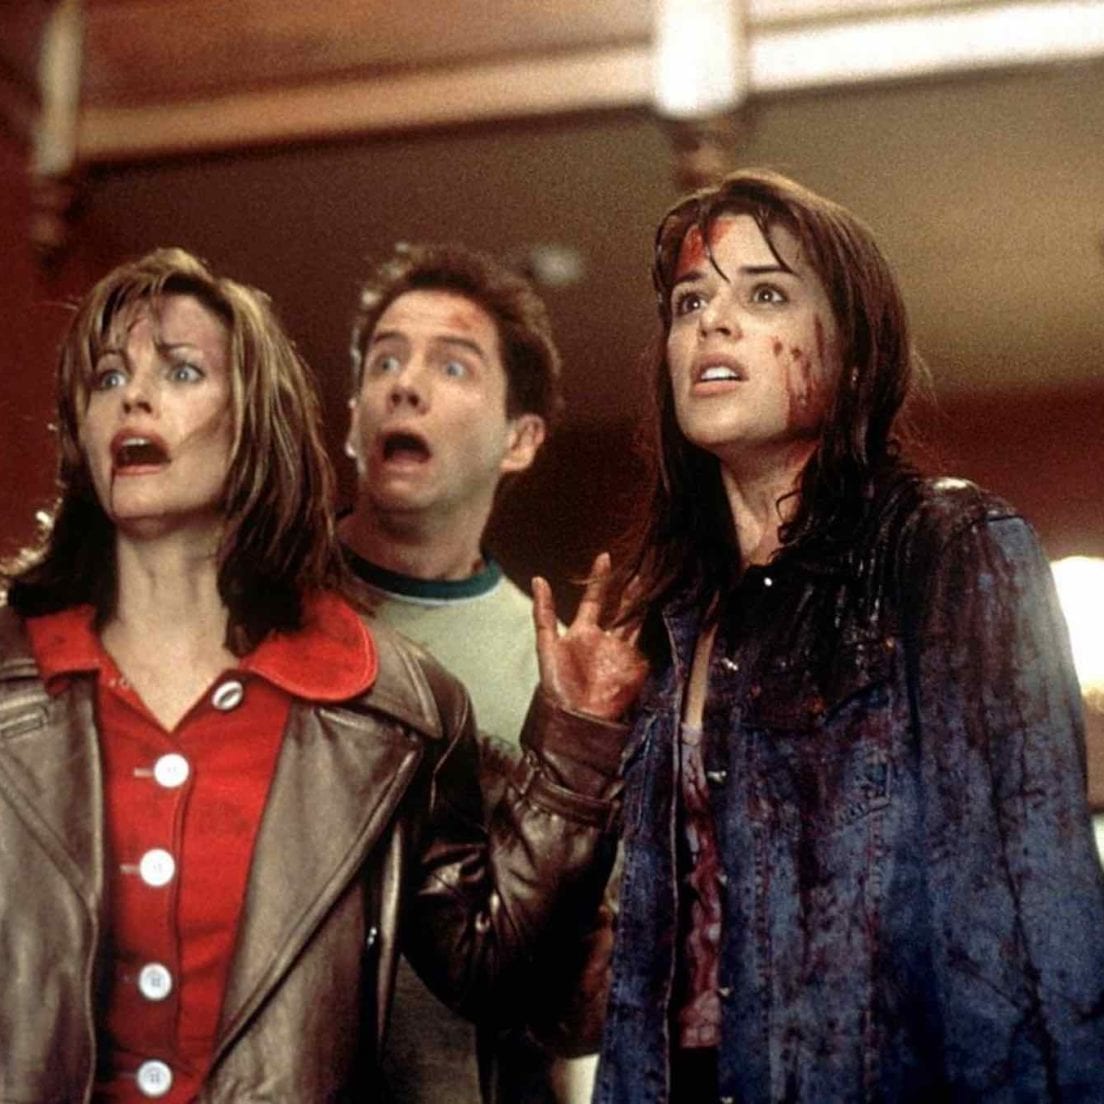 The original 'Scream' cast Who will be returning for the reboot